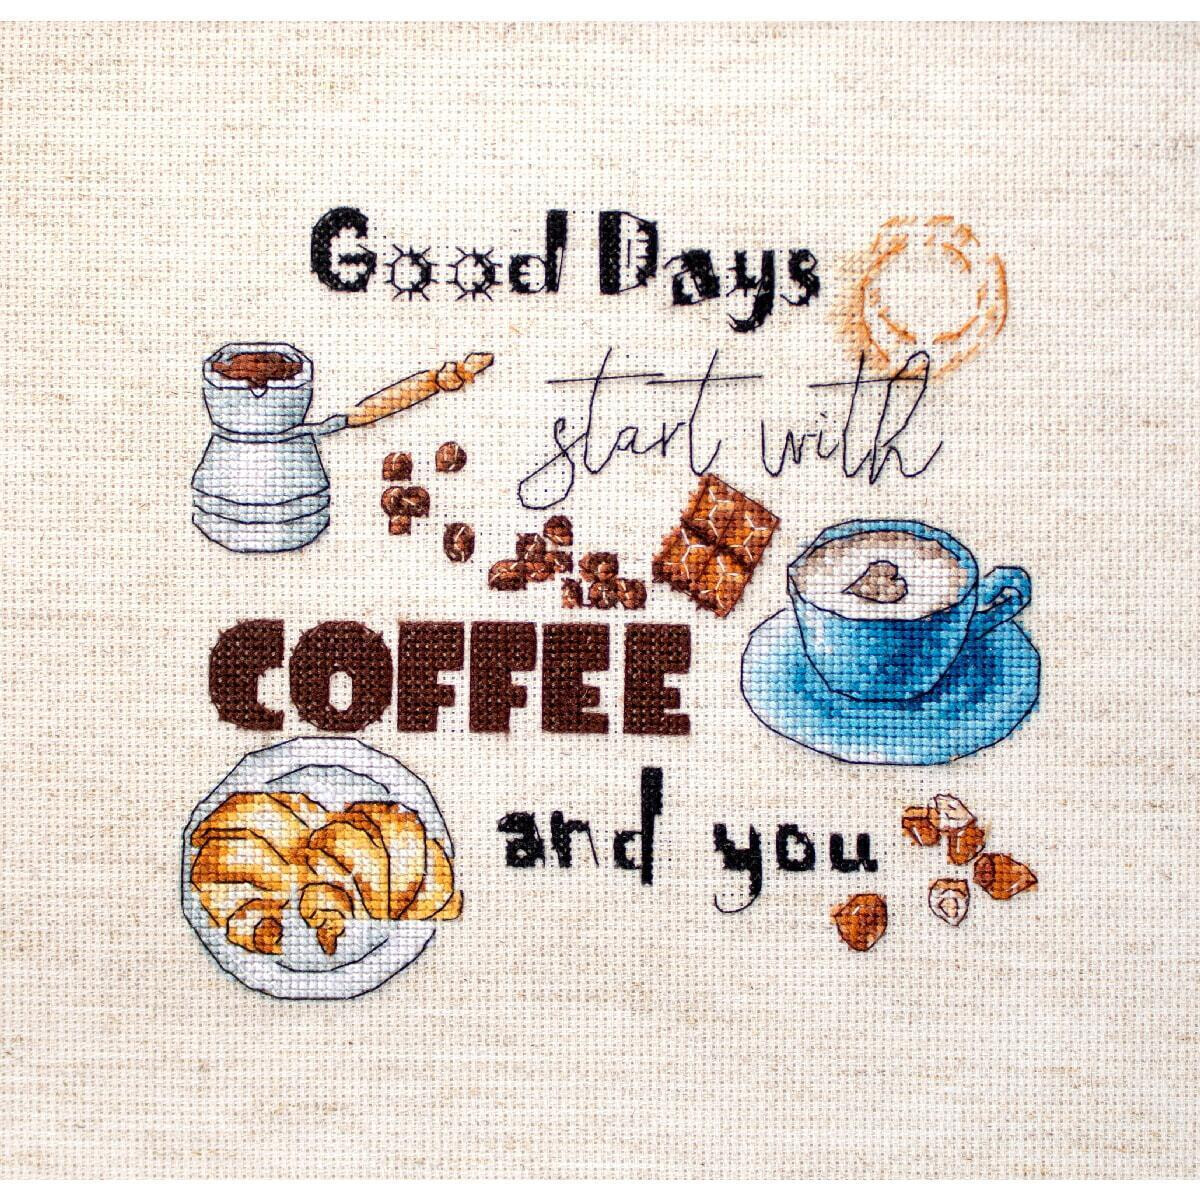 A cross stitch embroidery from Letistitch Embroidery Pack...